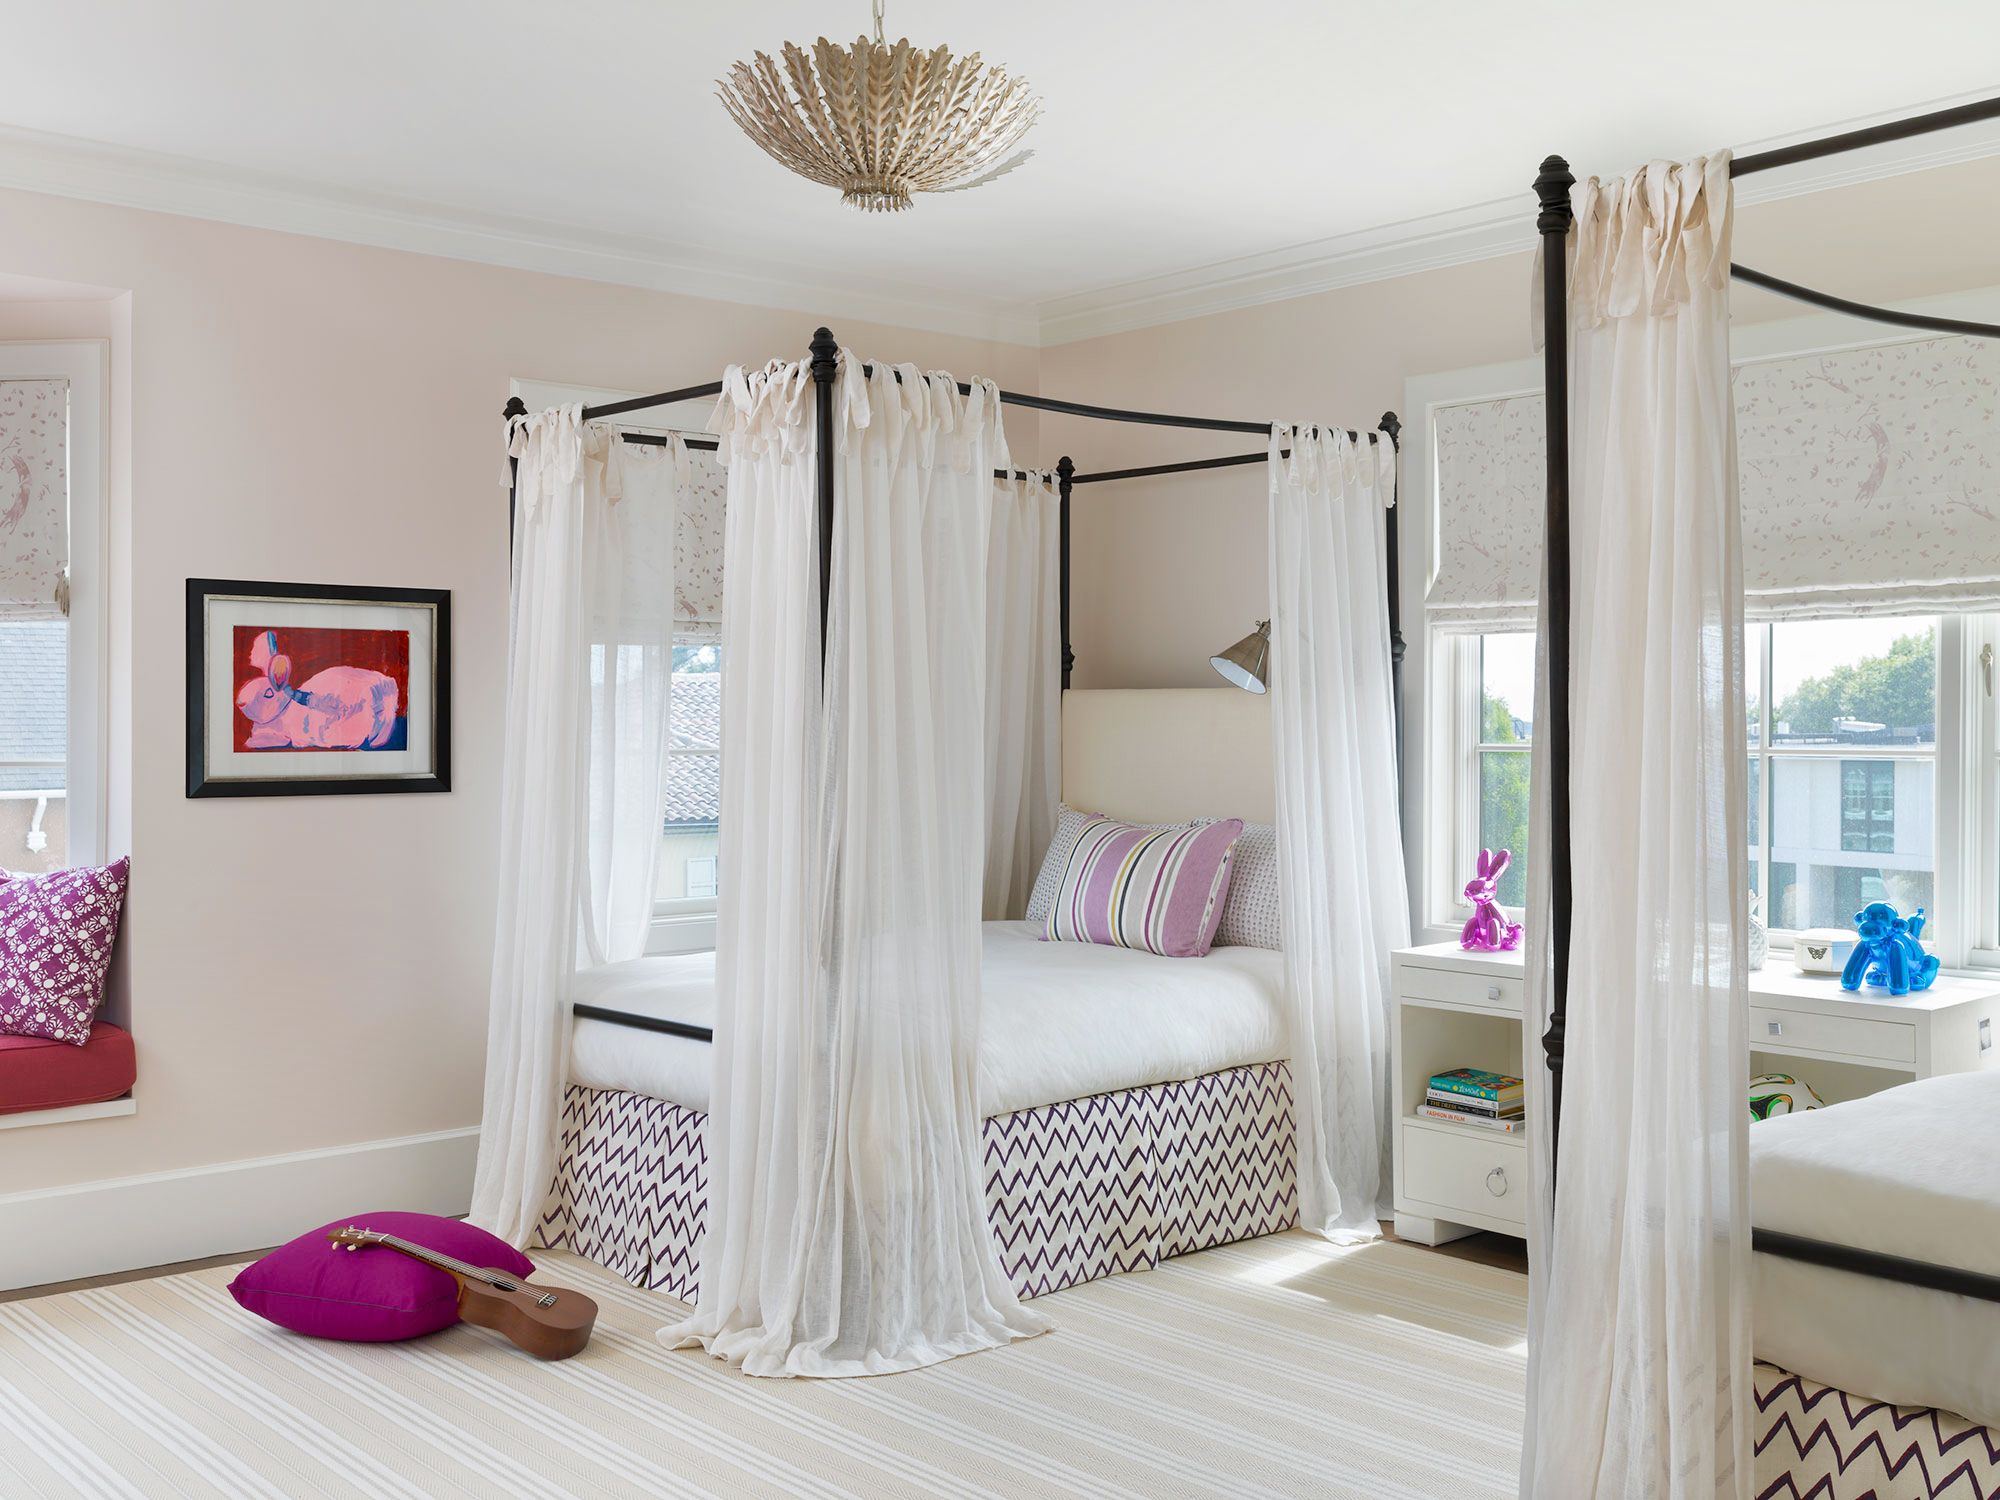 Some of the most great adolescent bedroom decoration ideas